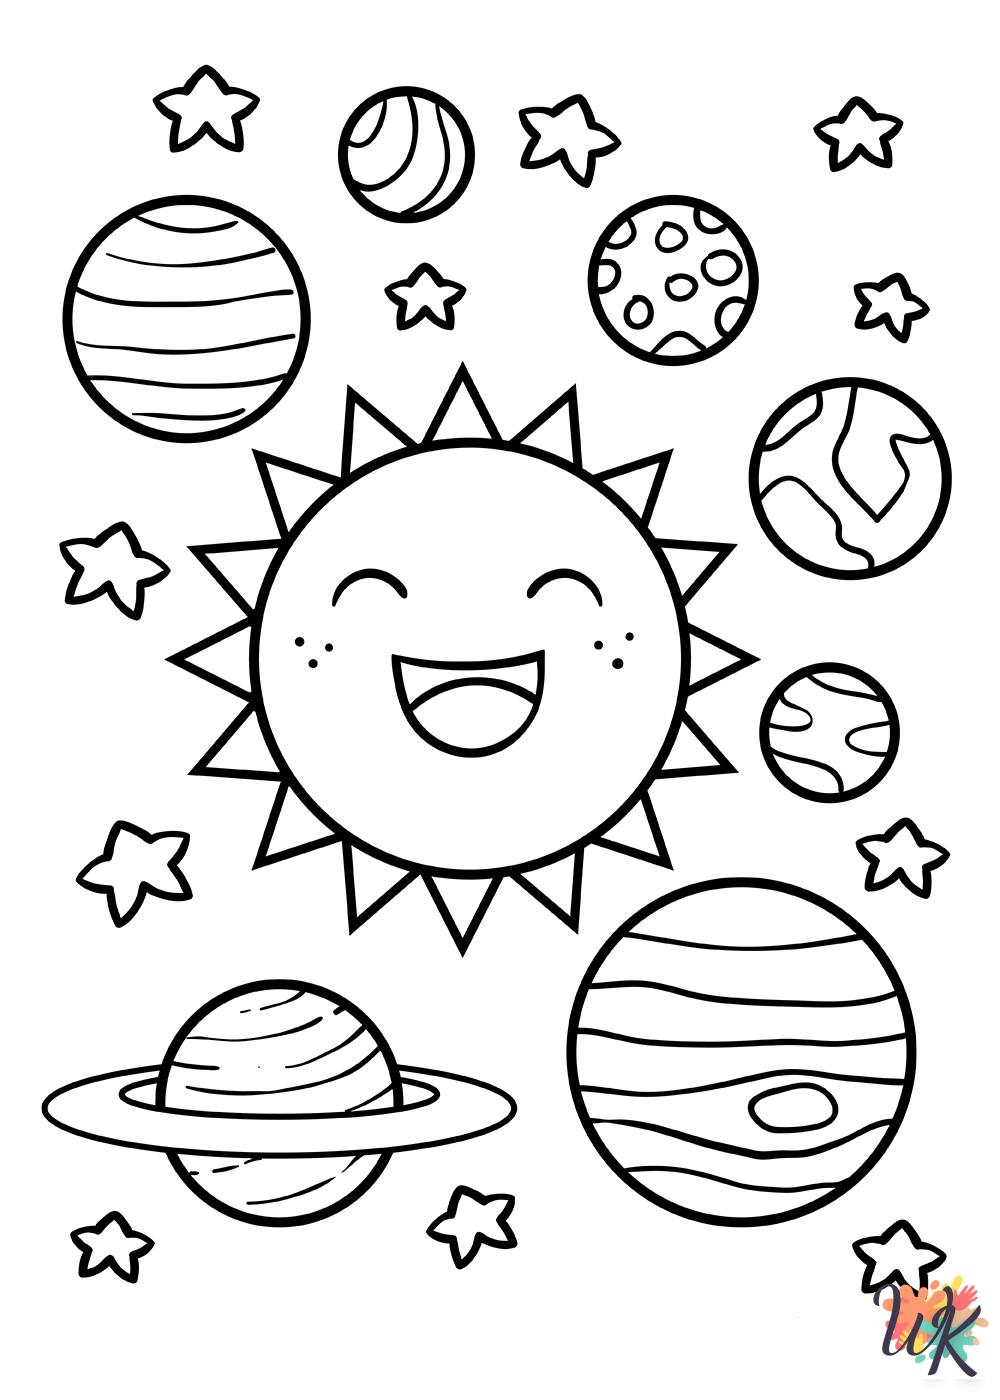 Solar System coloring pages for adults